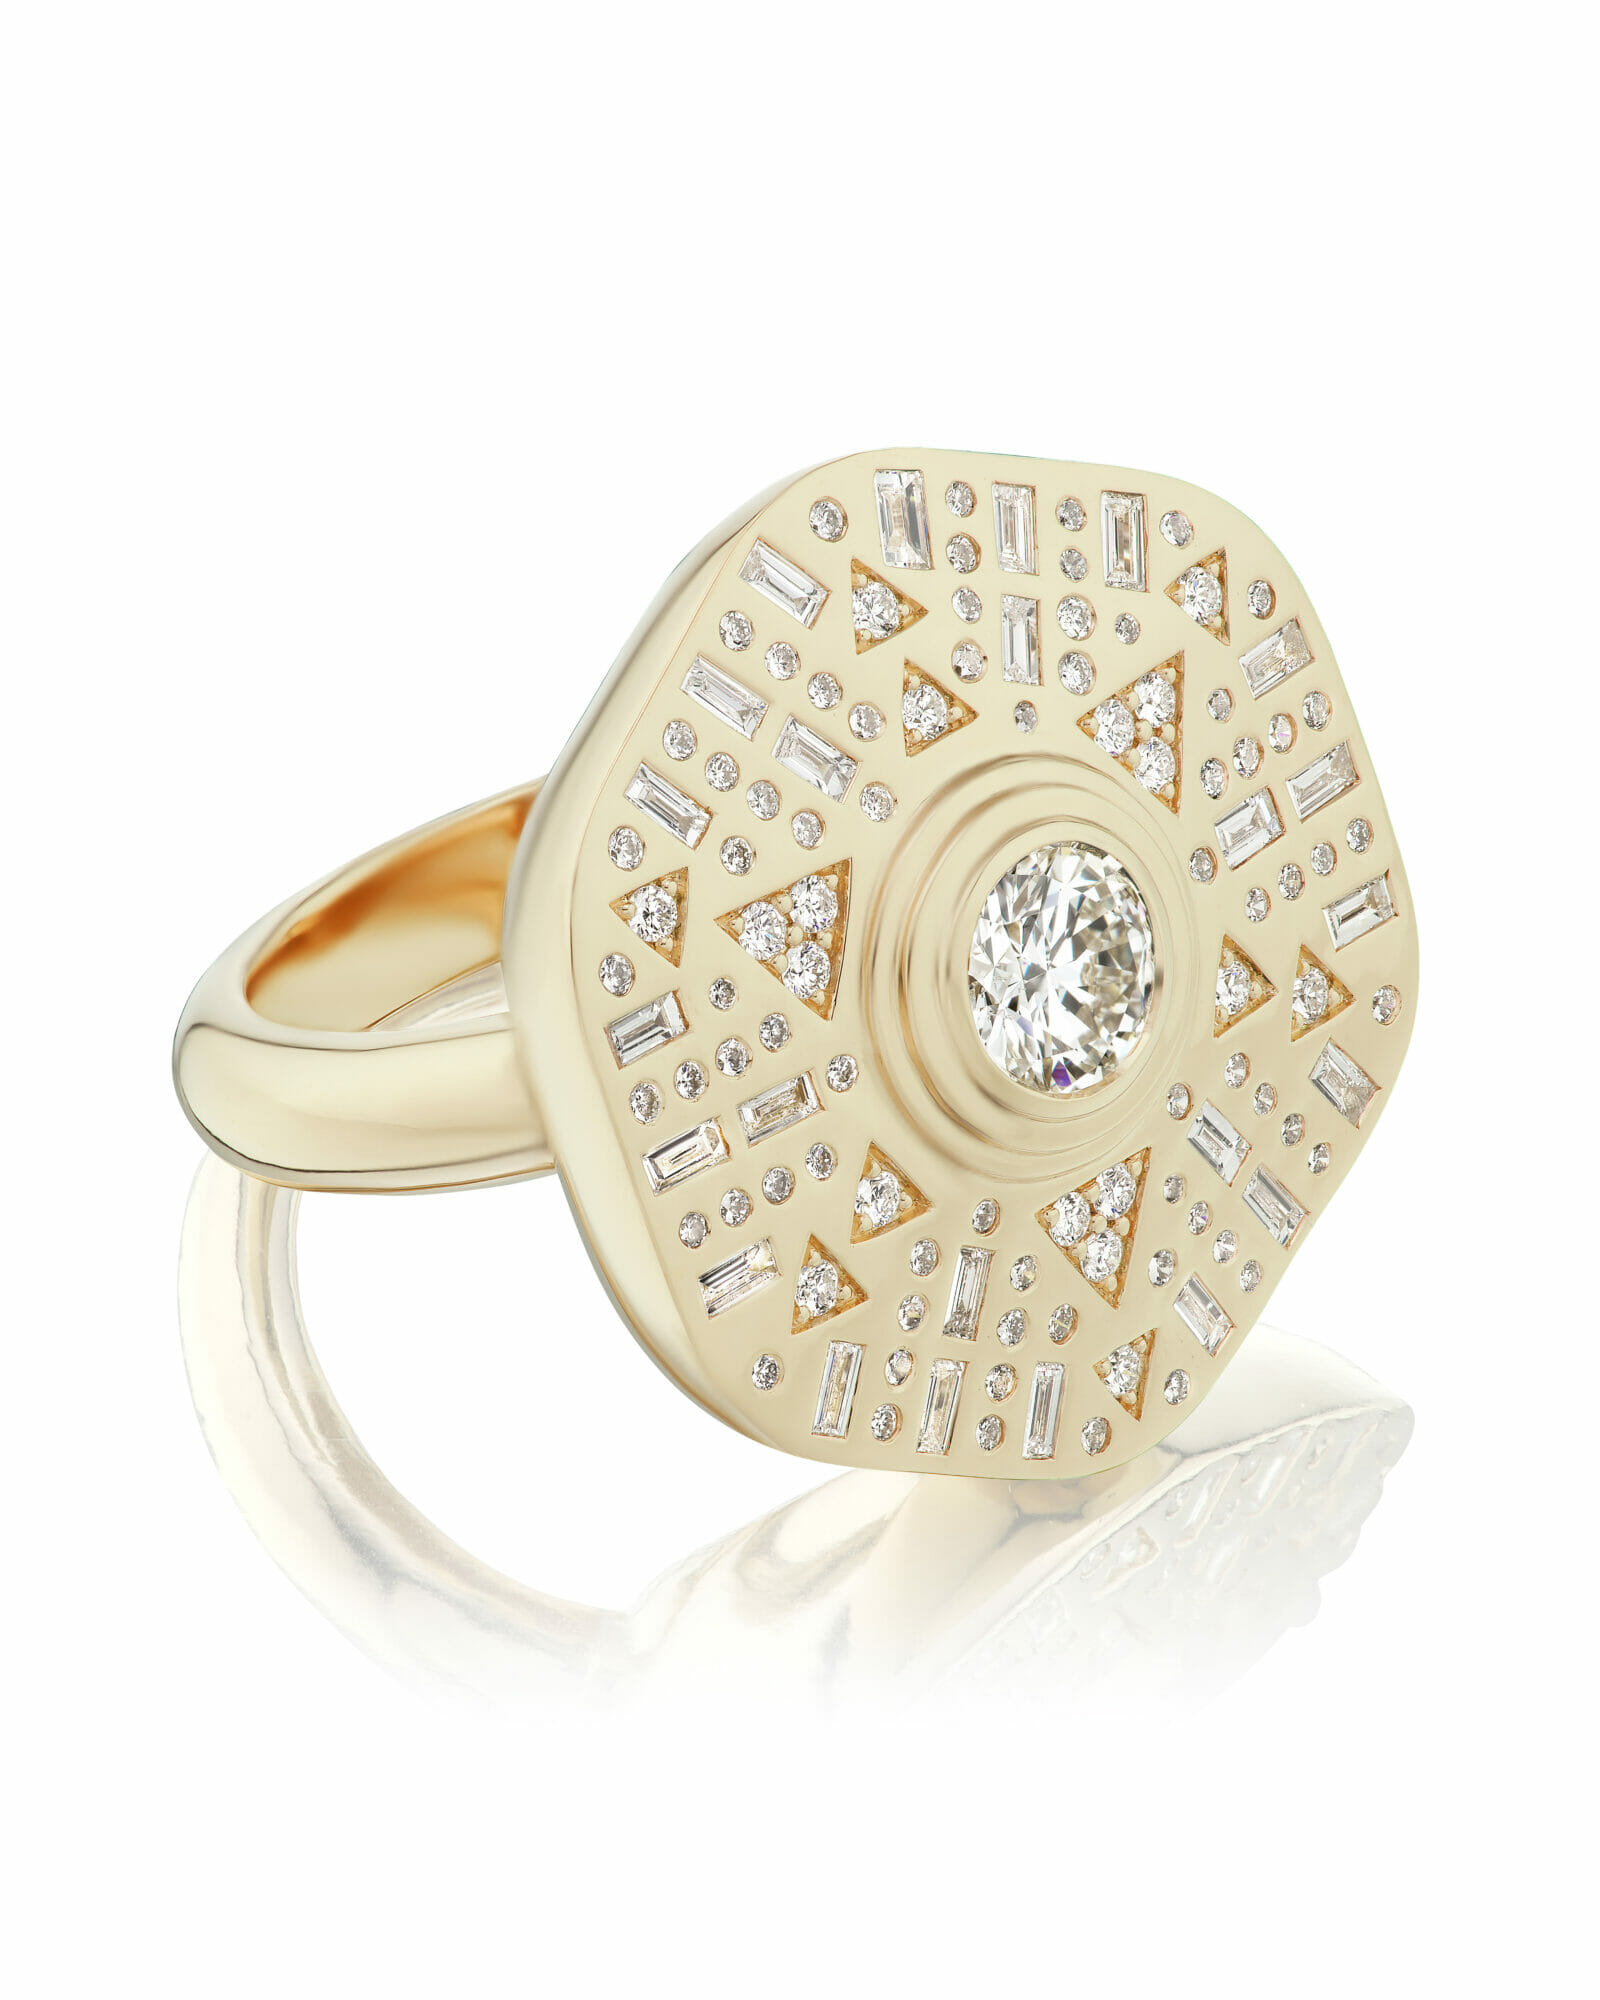 Harwell Godfrey’s Stardust Cocktail Ring